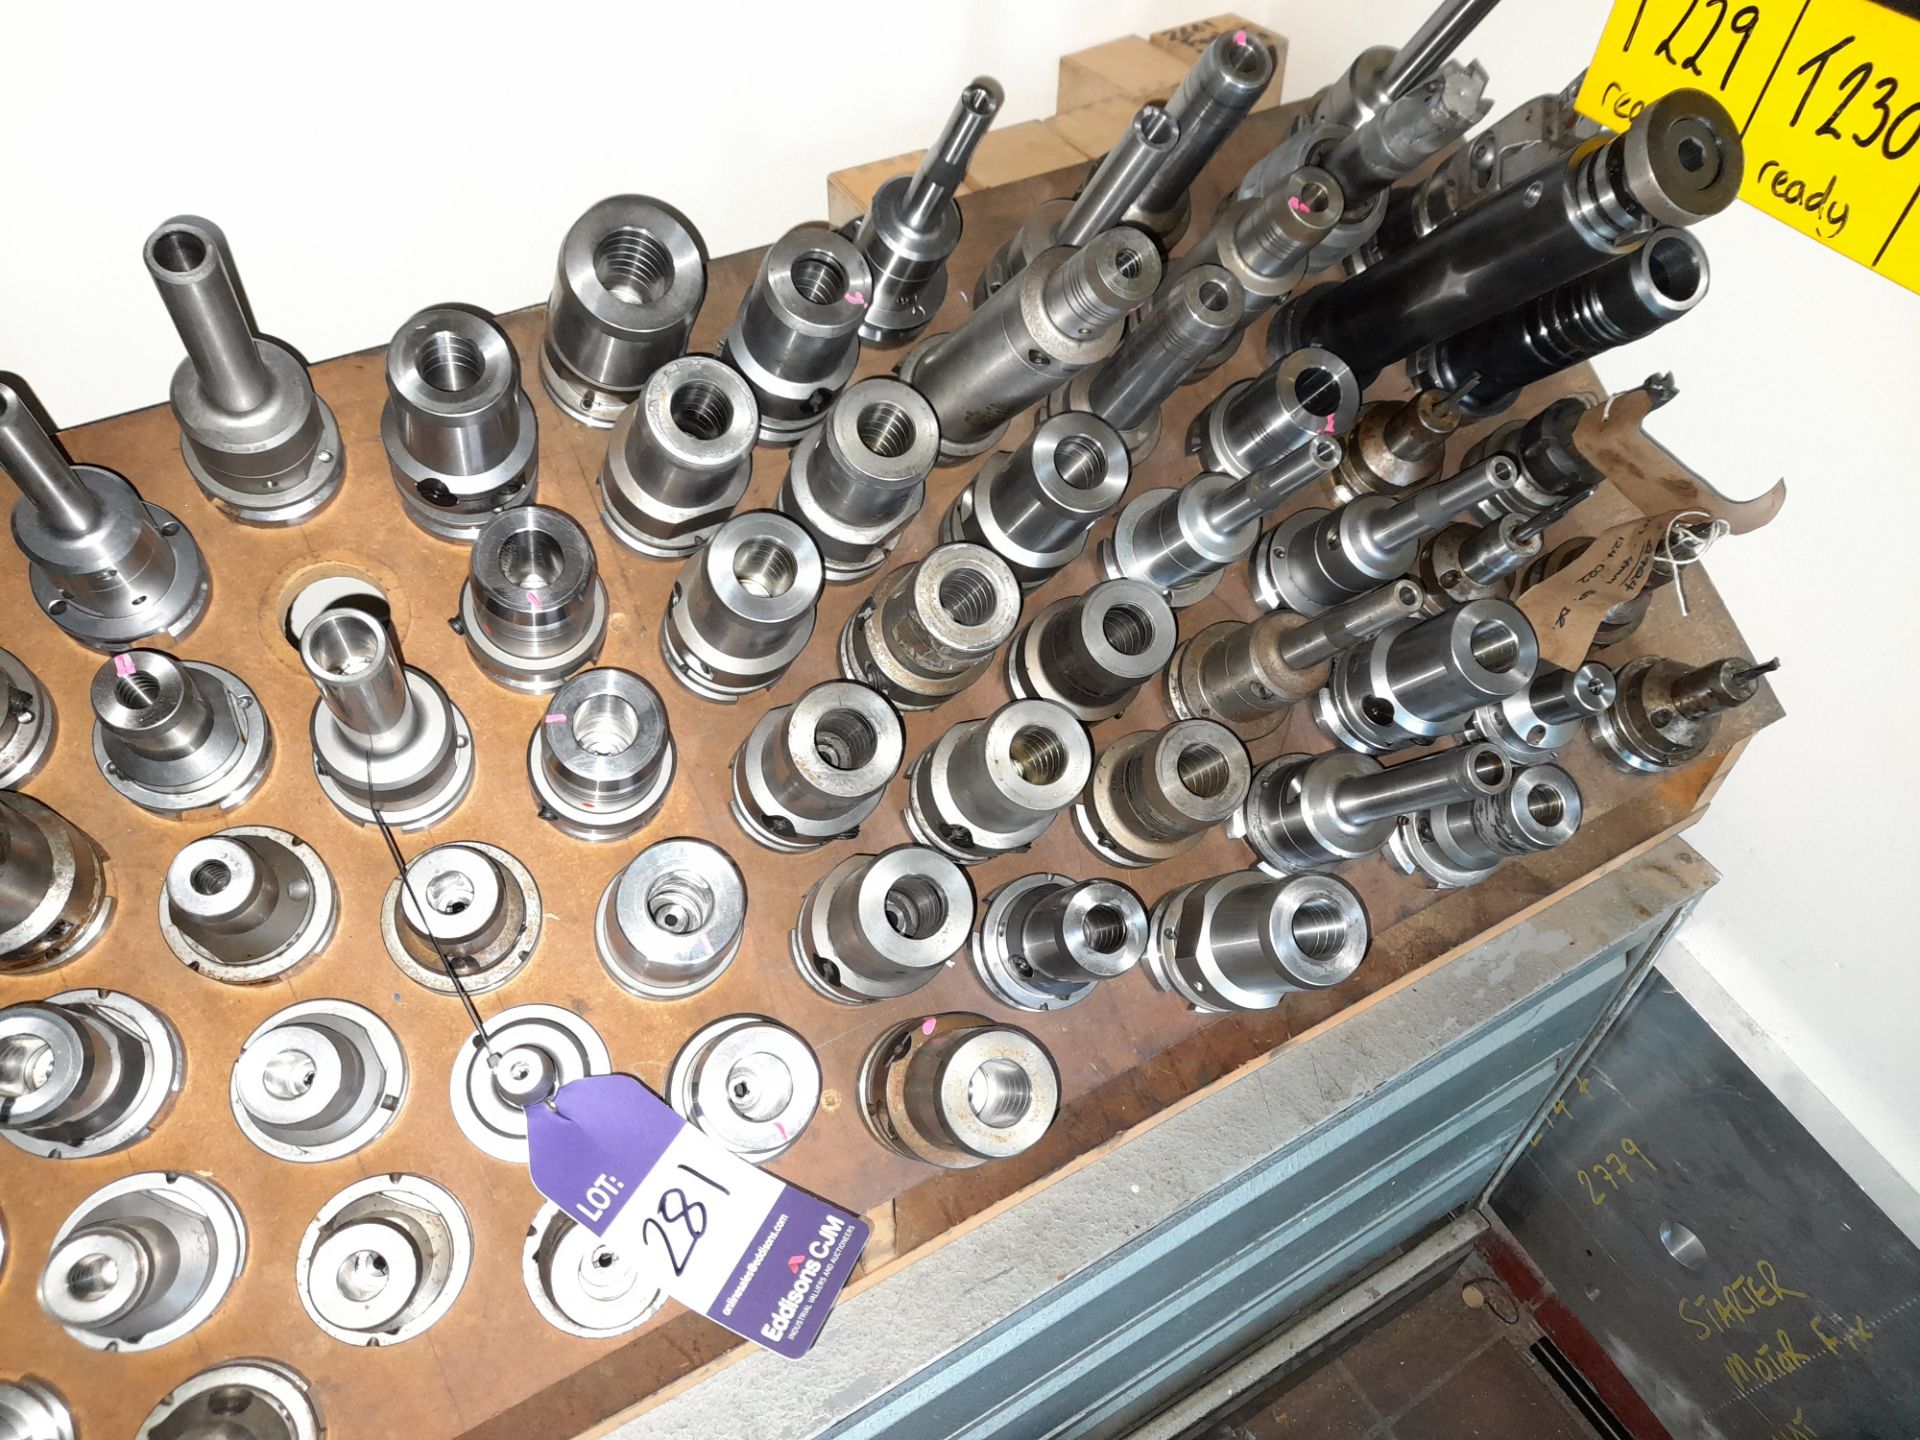 Approximately 120 x BT40 extension CNC tool holders, to rack - Image 4 of 4